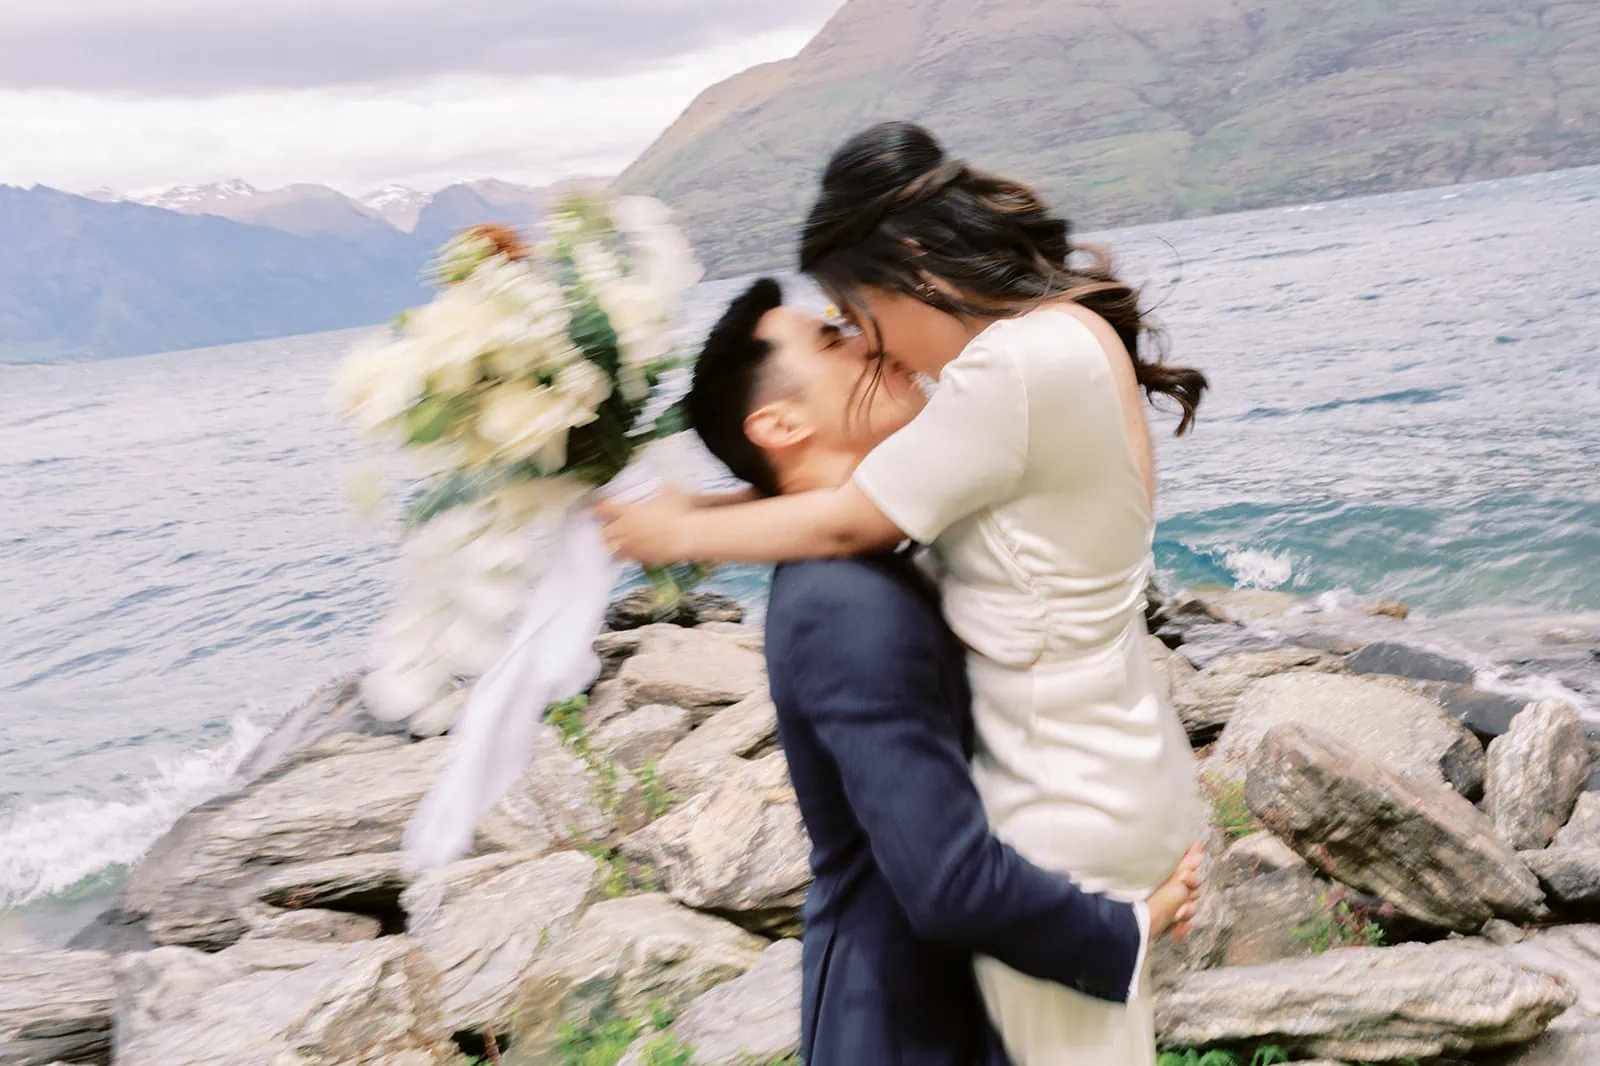 Queenstown Elopement Heli Wedding Photographer クイーンズタウン結婚式 | A pre-wedding photoshoot capturing the intimate moment of a man and woman sharing a passionate kiss on a rocky shore.